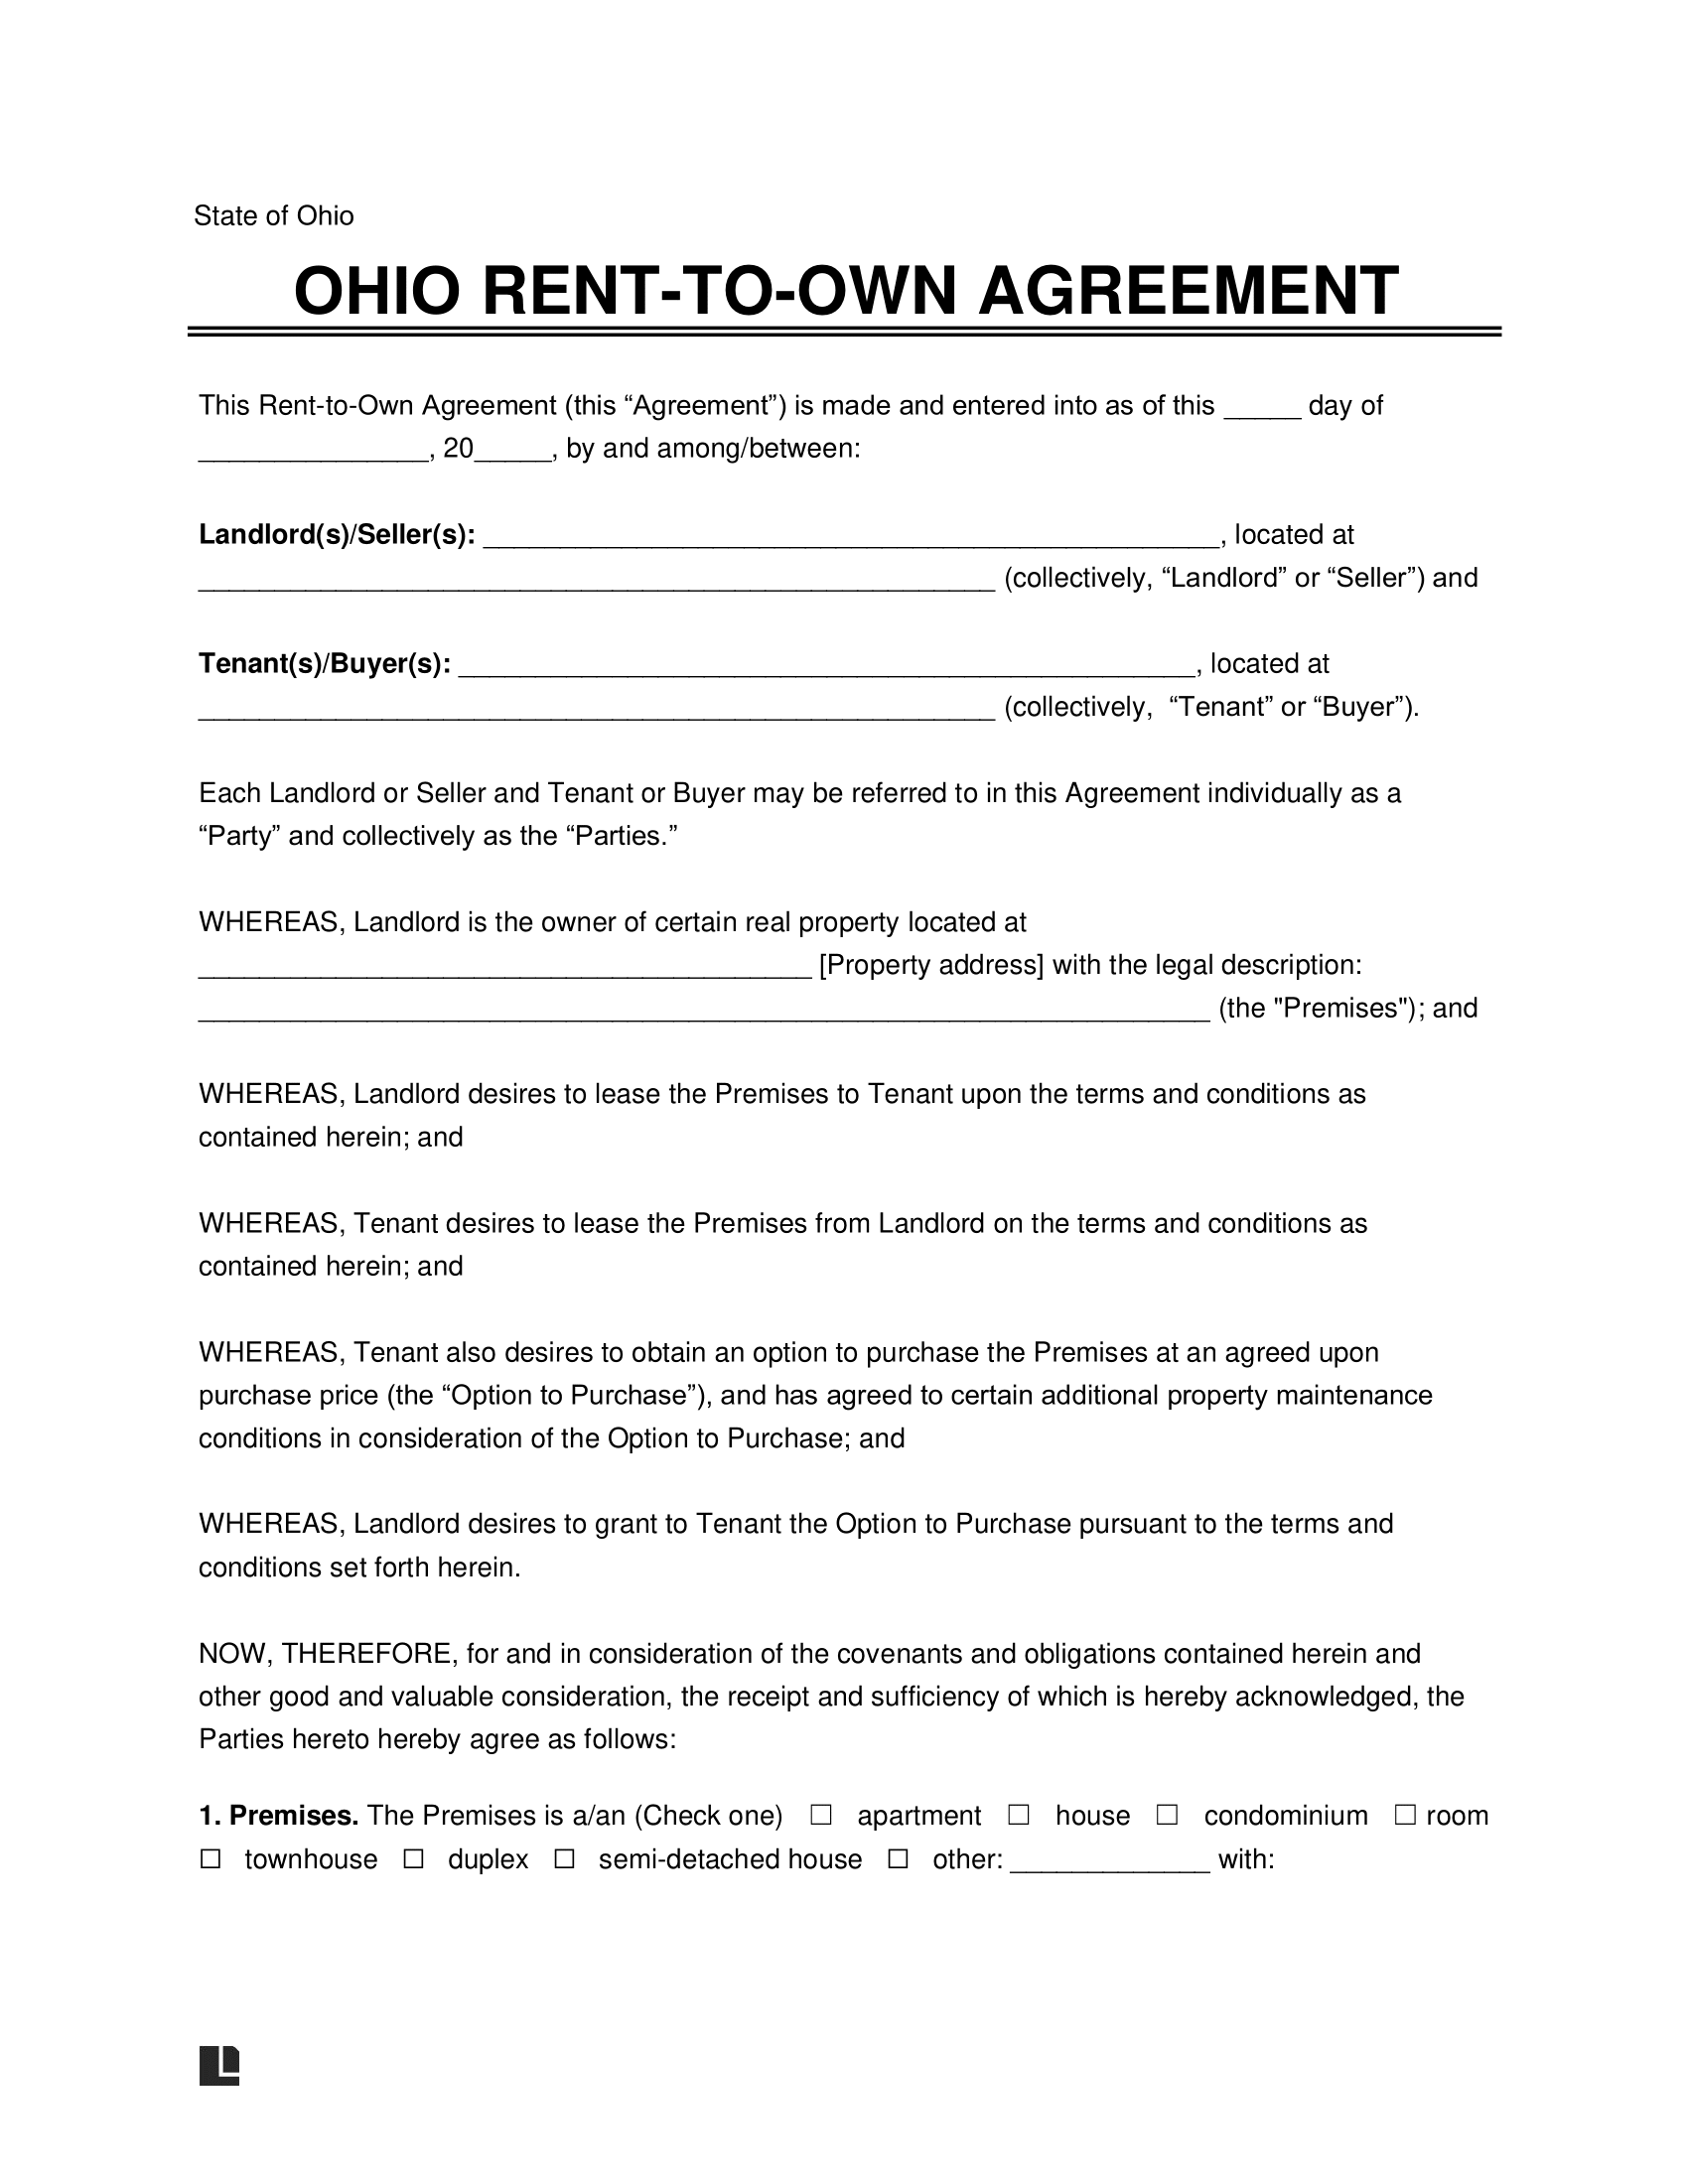 Ohio Lease-to-Own Option to Purchase Agreement